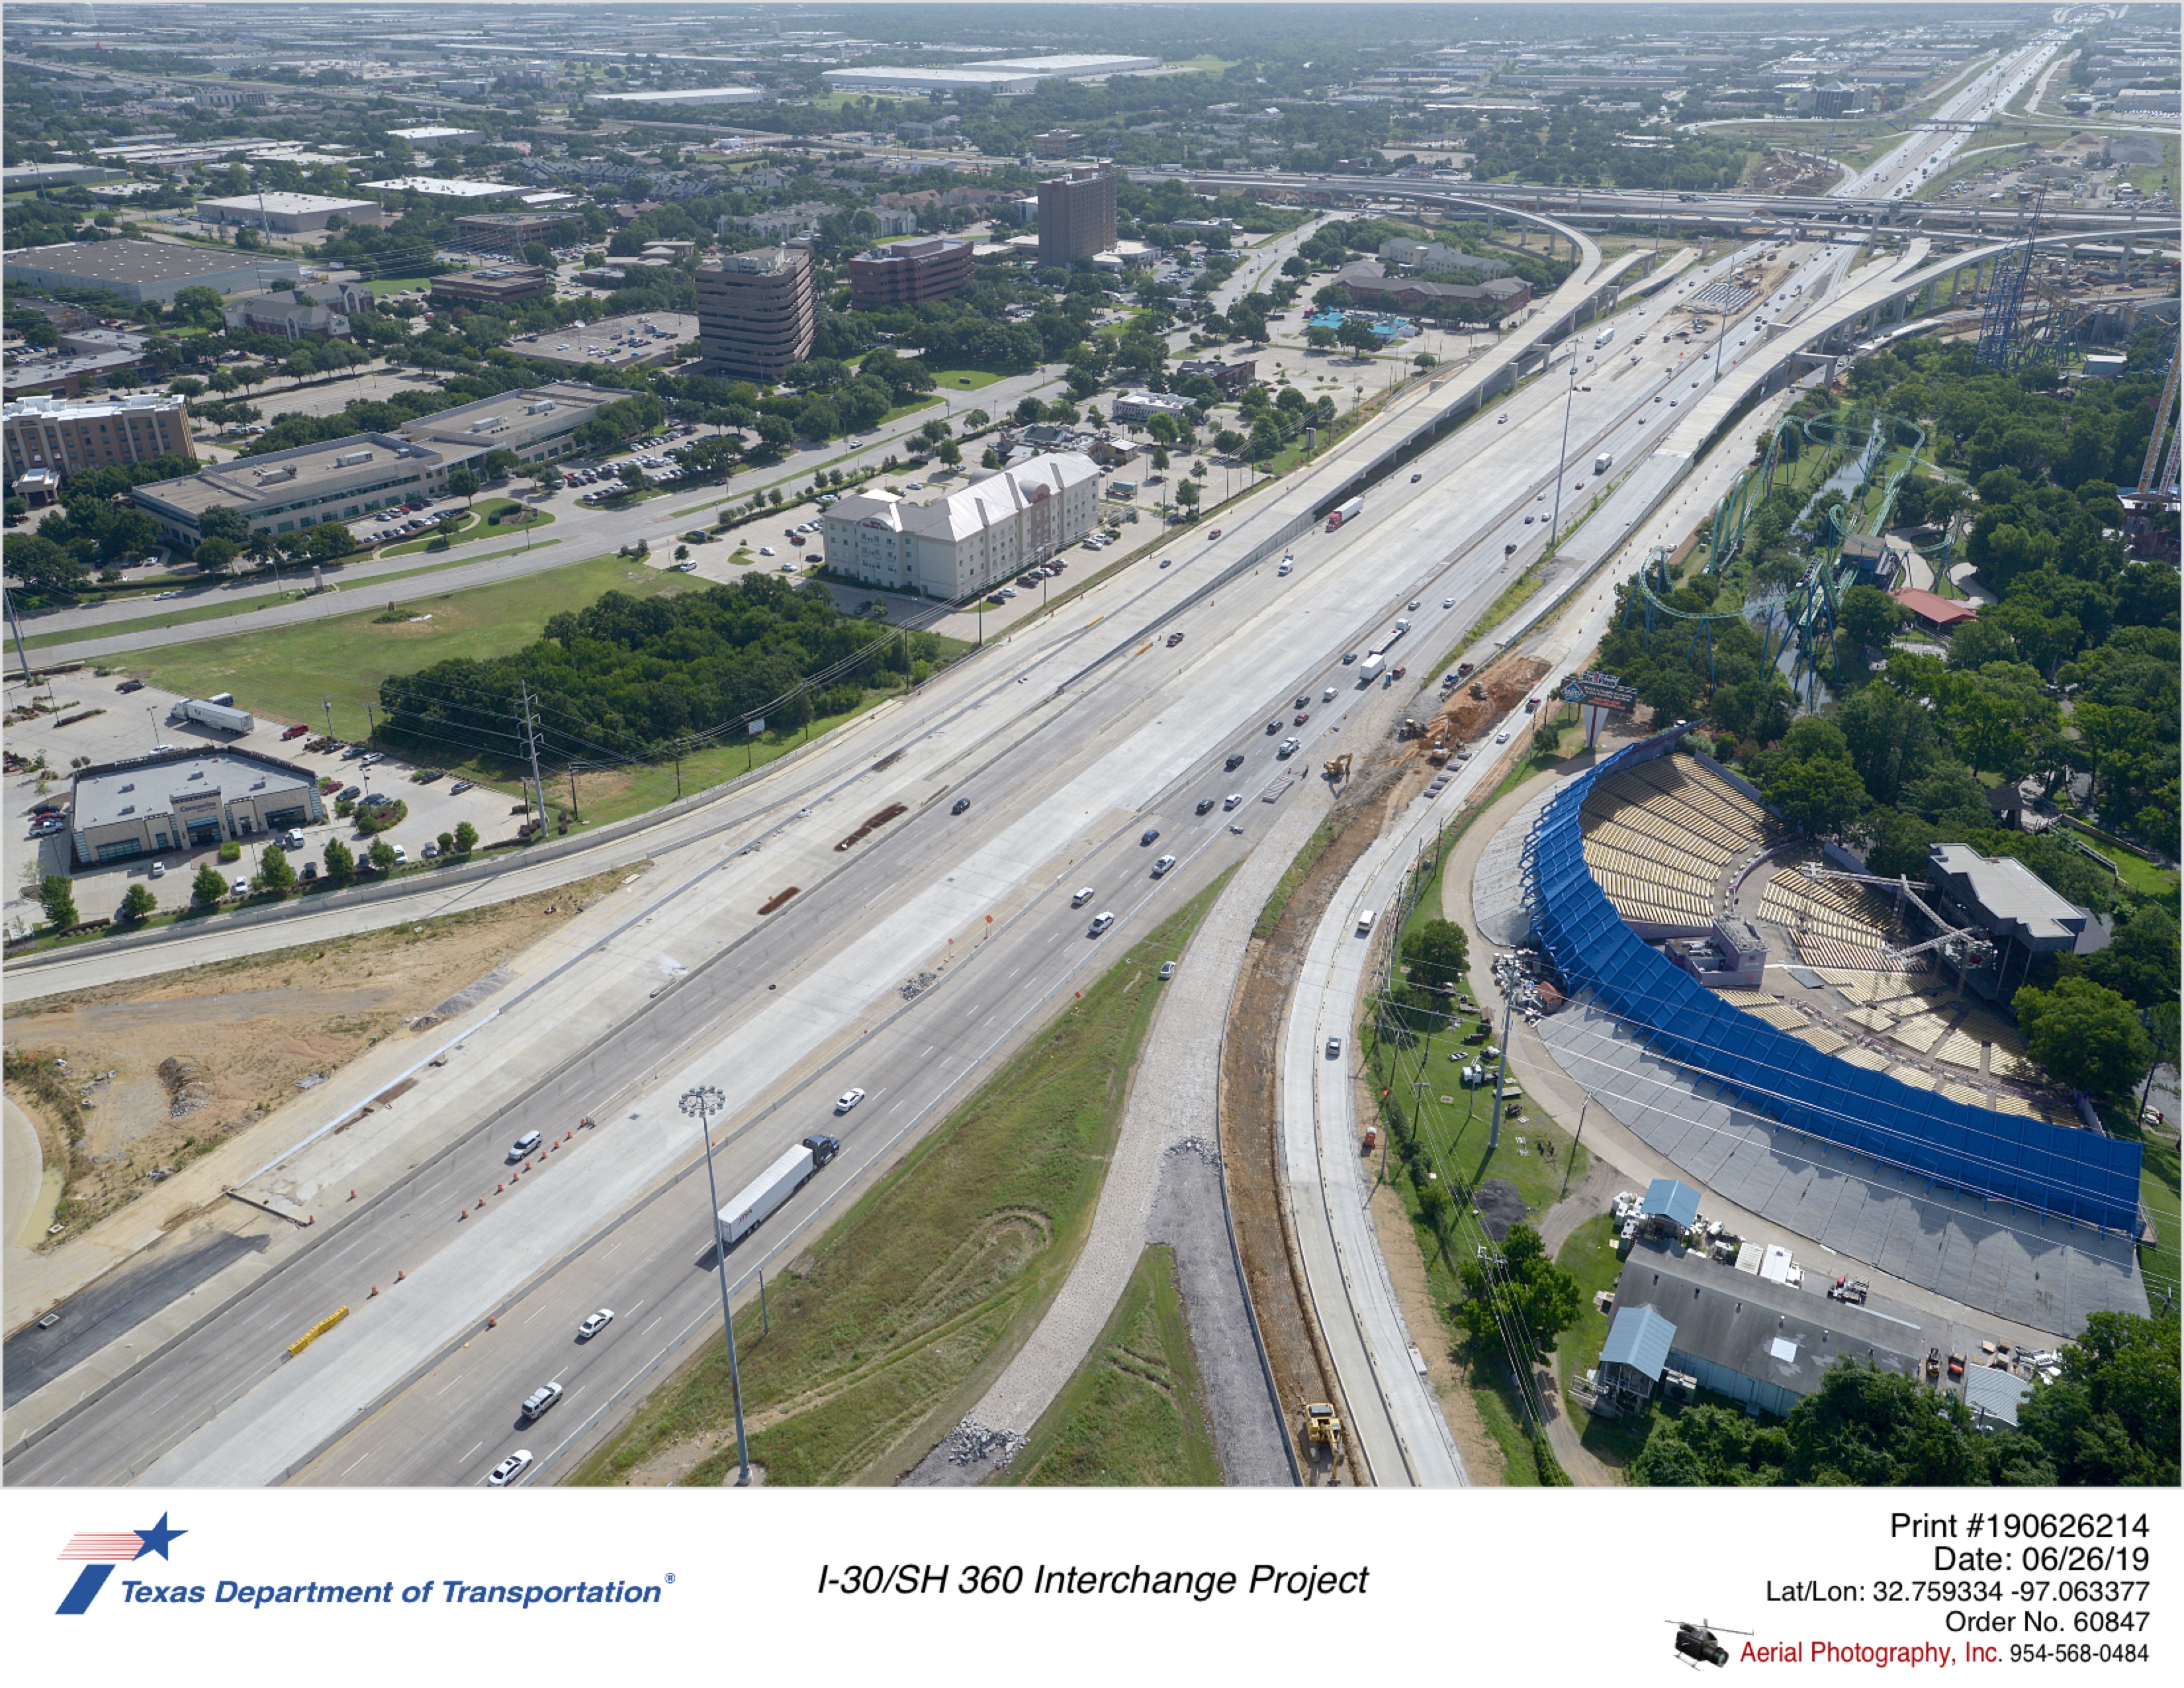 I-30 over Ballpark Way looking northeast. Construction of new Copeland Rd and new eastbound exit to Copeland Rd seen.